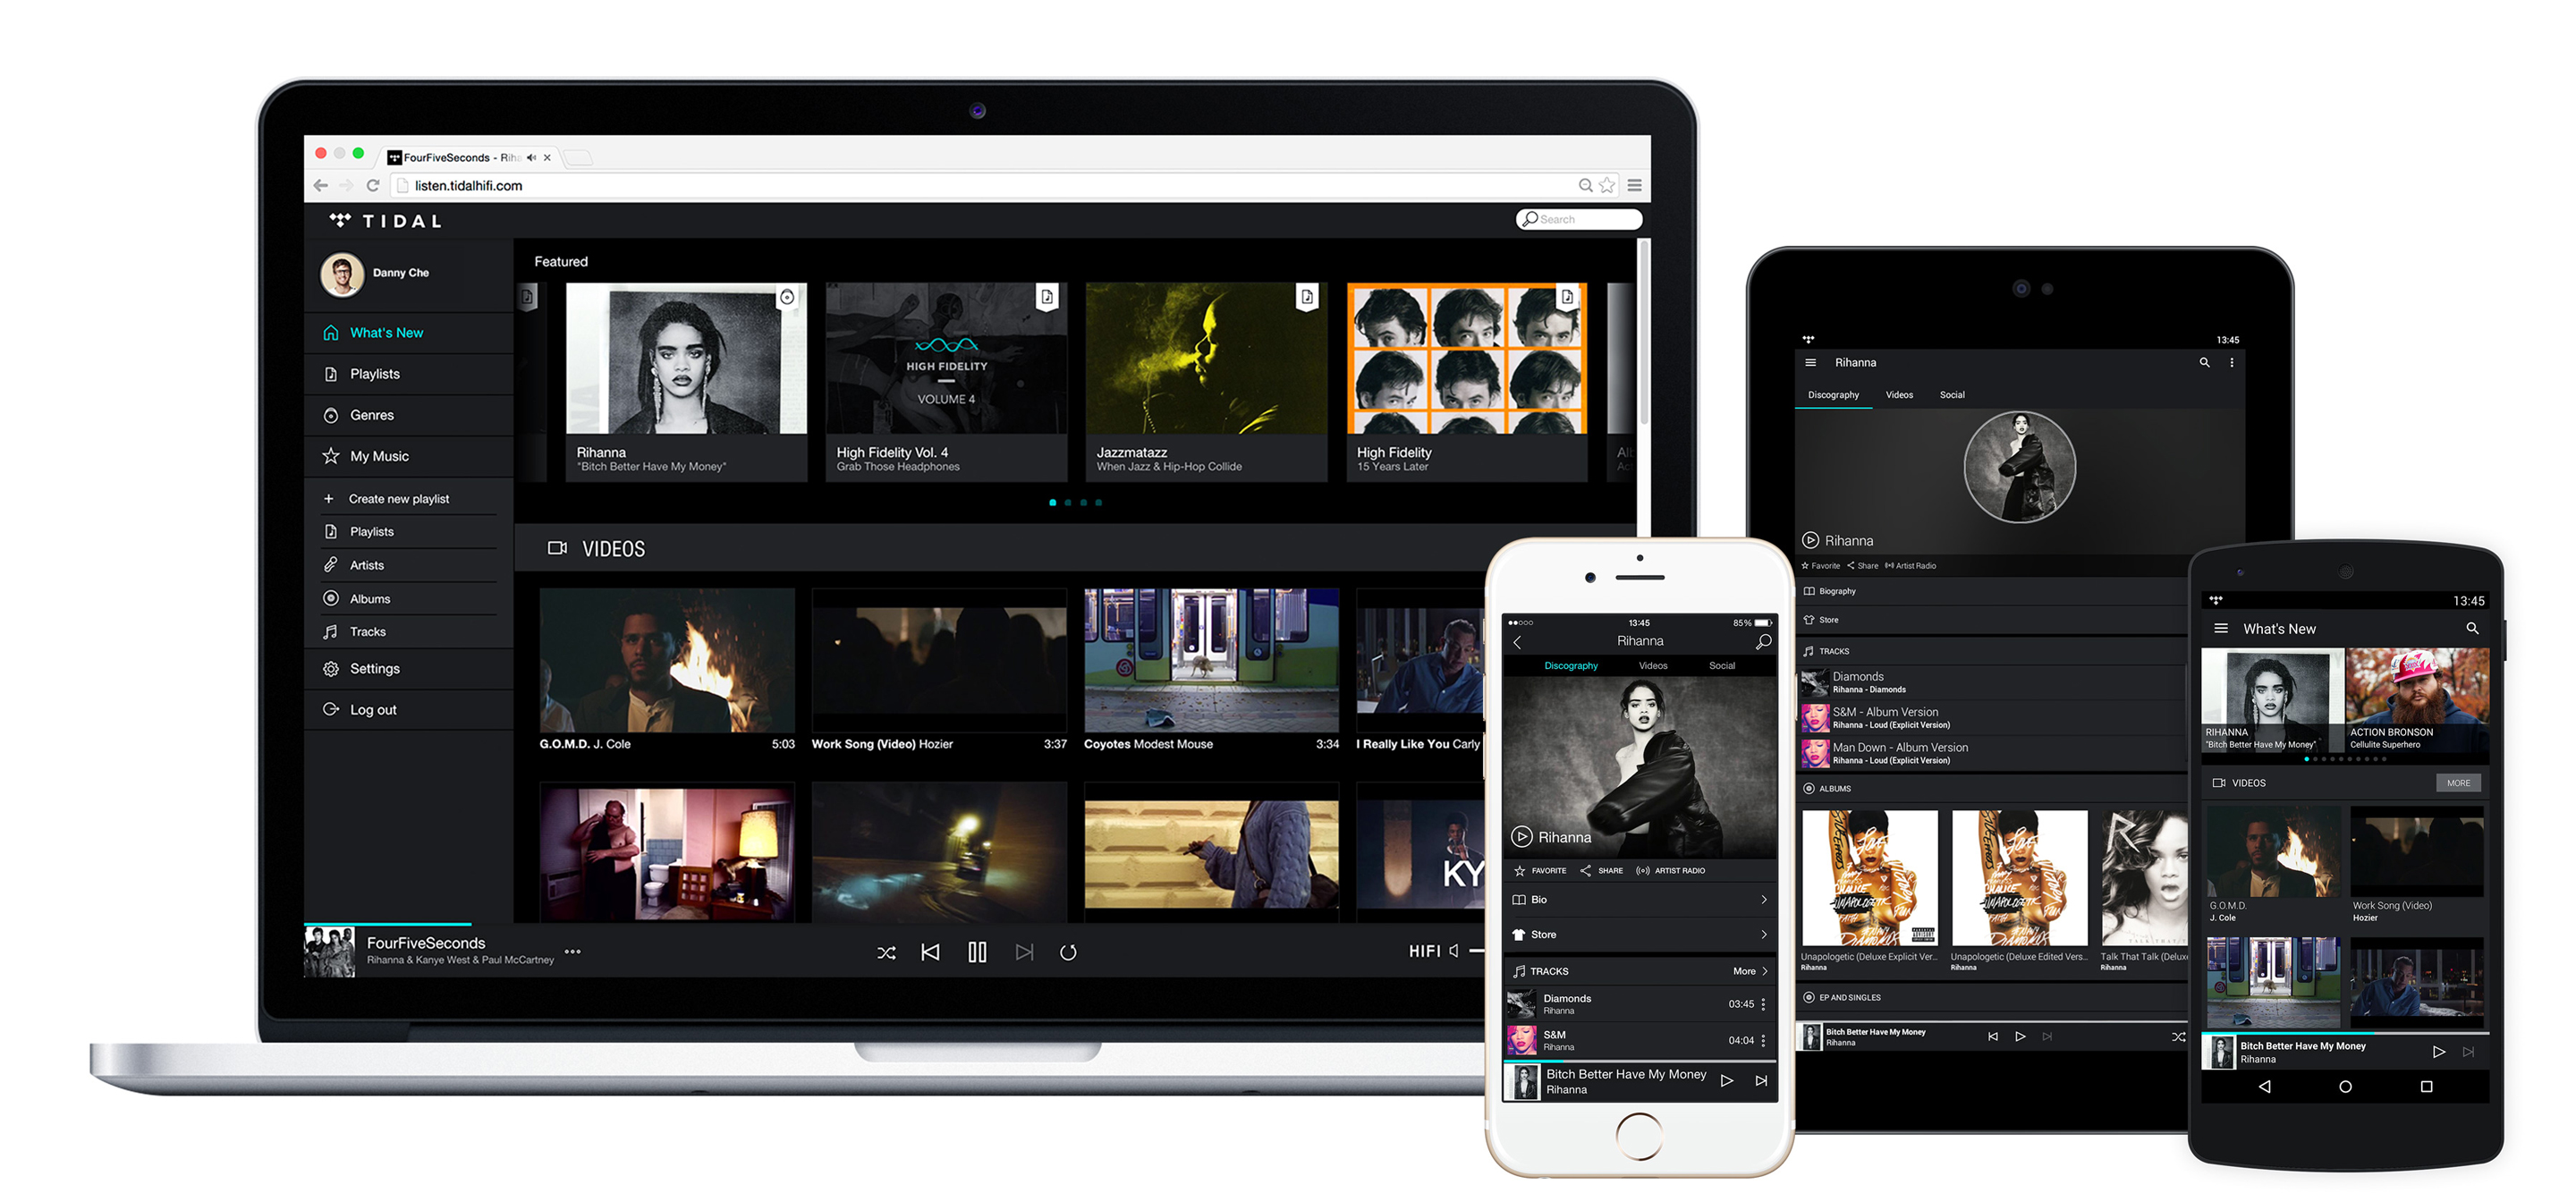 TIDAL investigating security breach after data manipulation allegations, fallouts increase